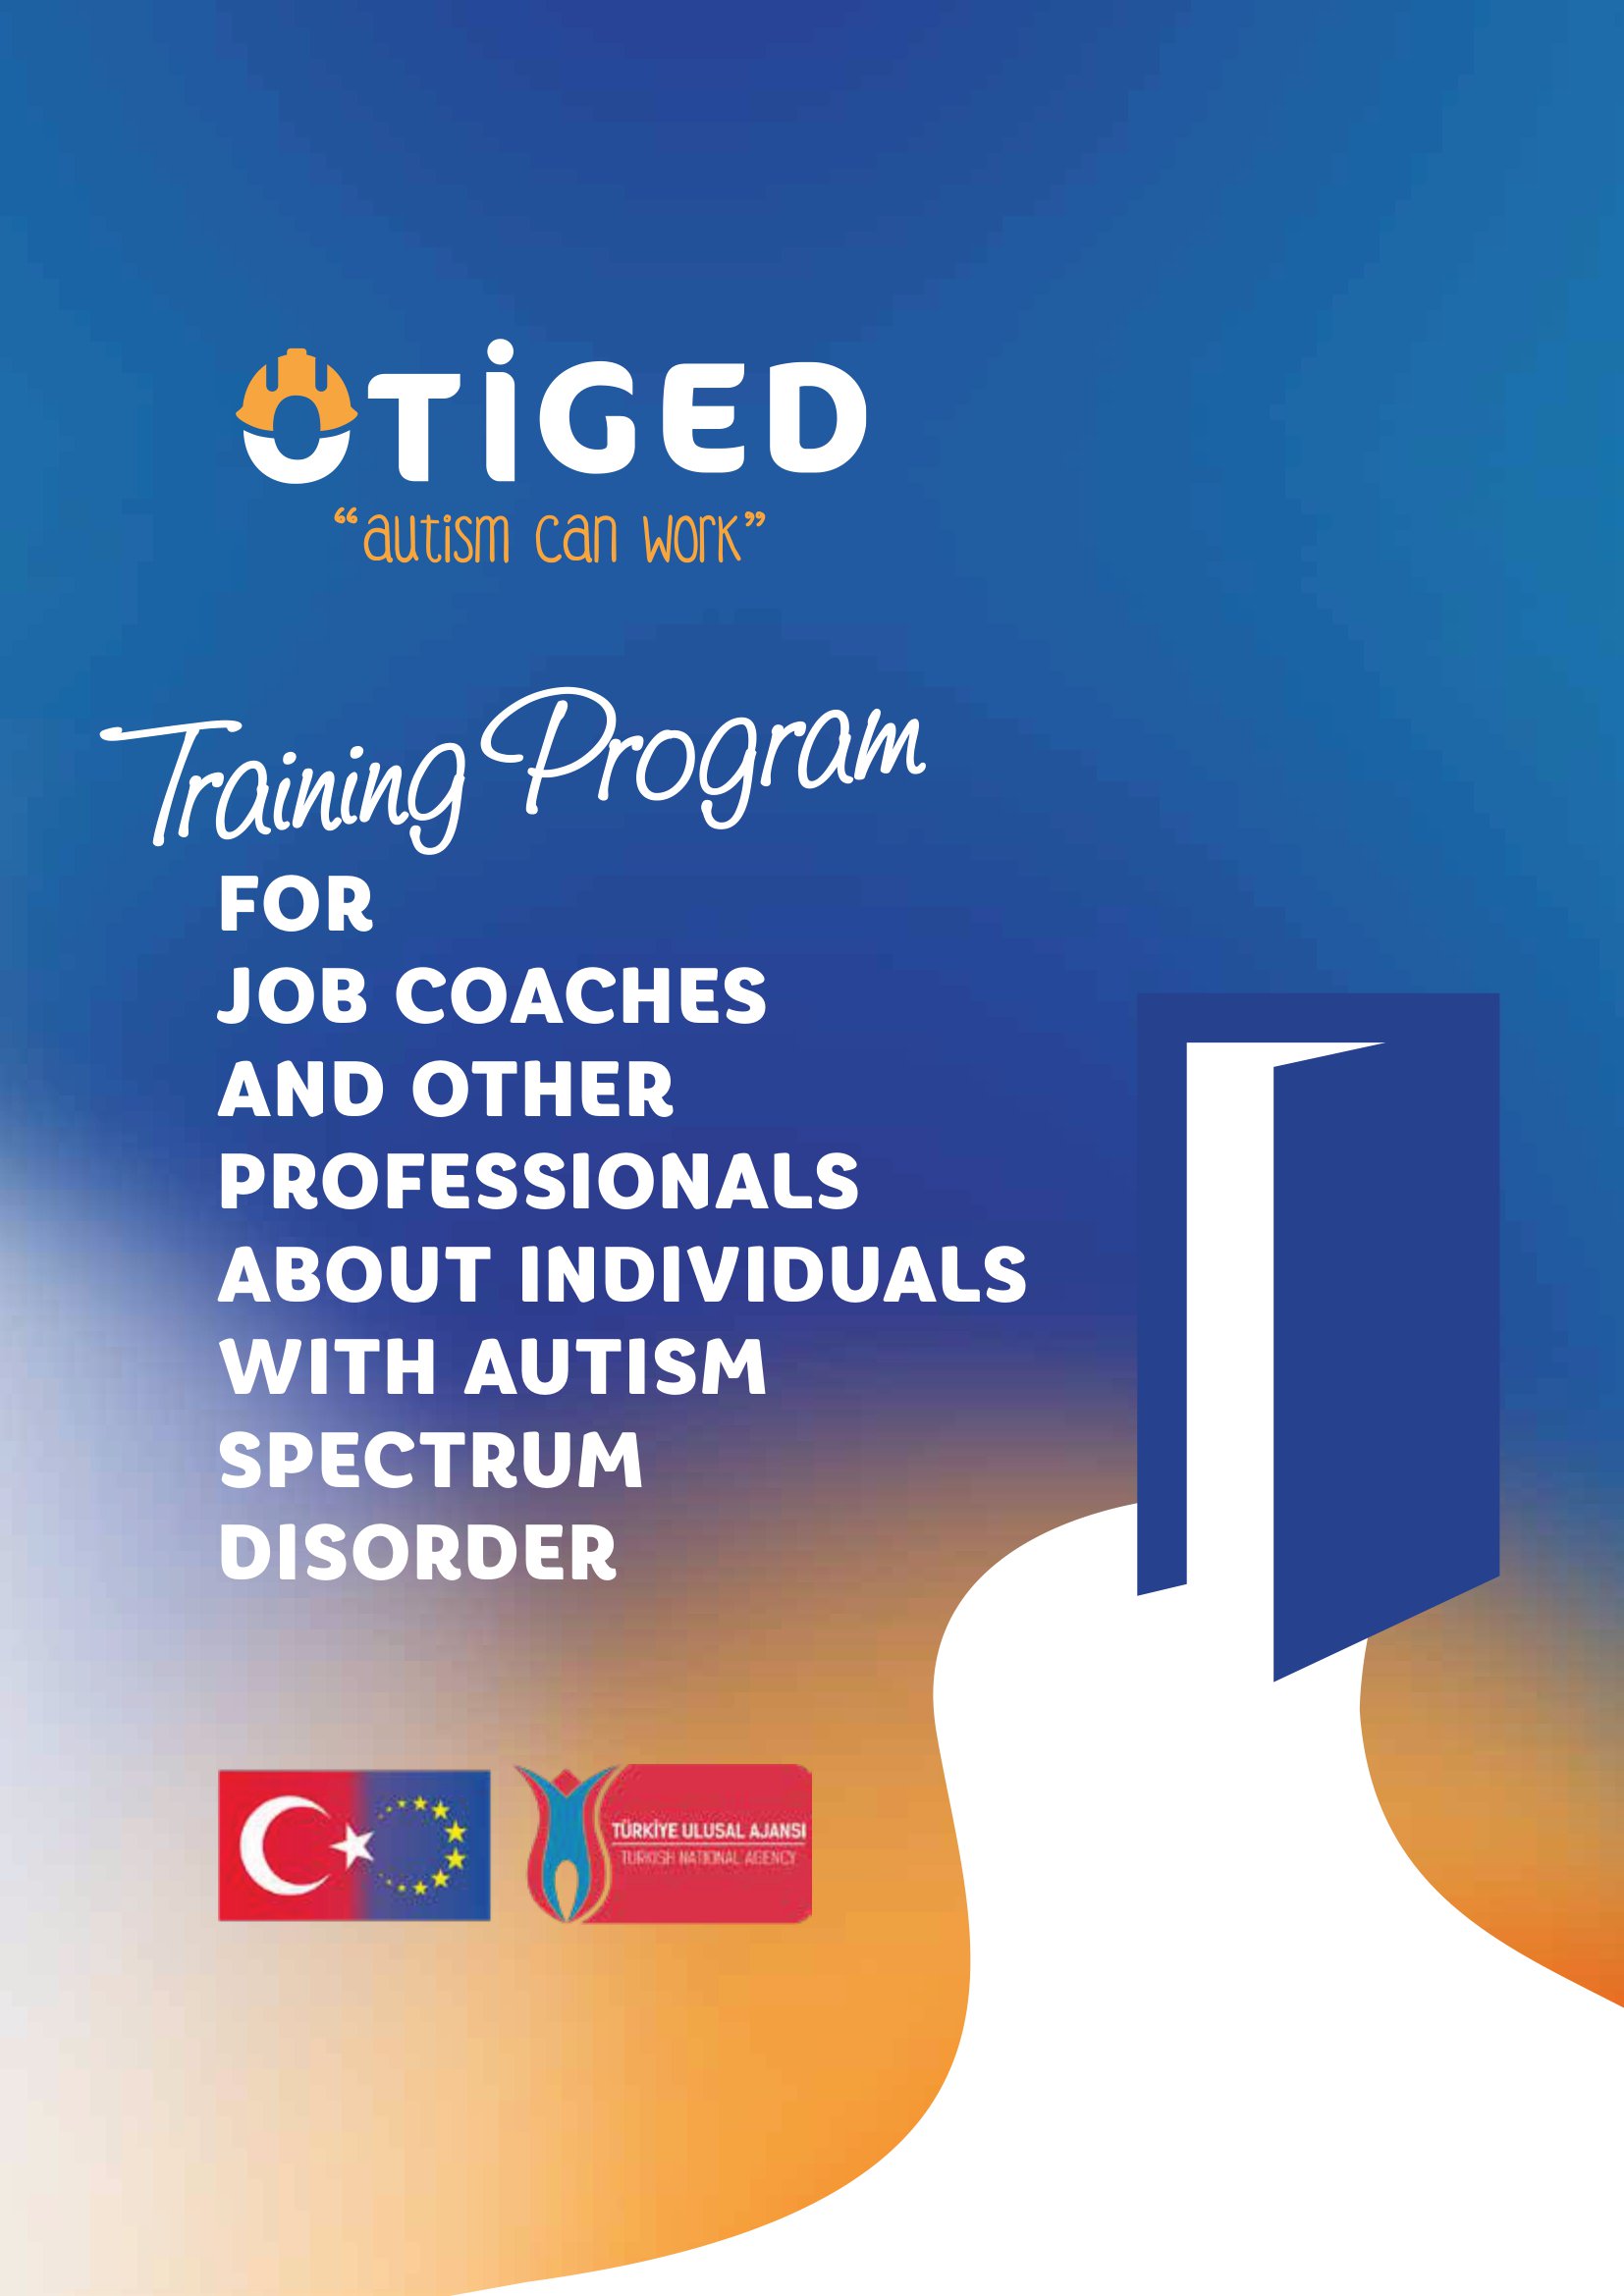 TRAINING PROGRAM FOR JOB COACHES AND OTHER  PROFESSIONALS  ABOUT INDIVIDUALS  WITH AUTISM  SPECTRUM DISORDER